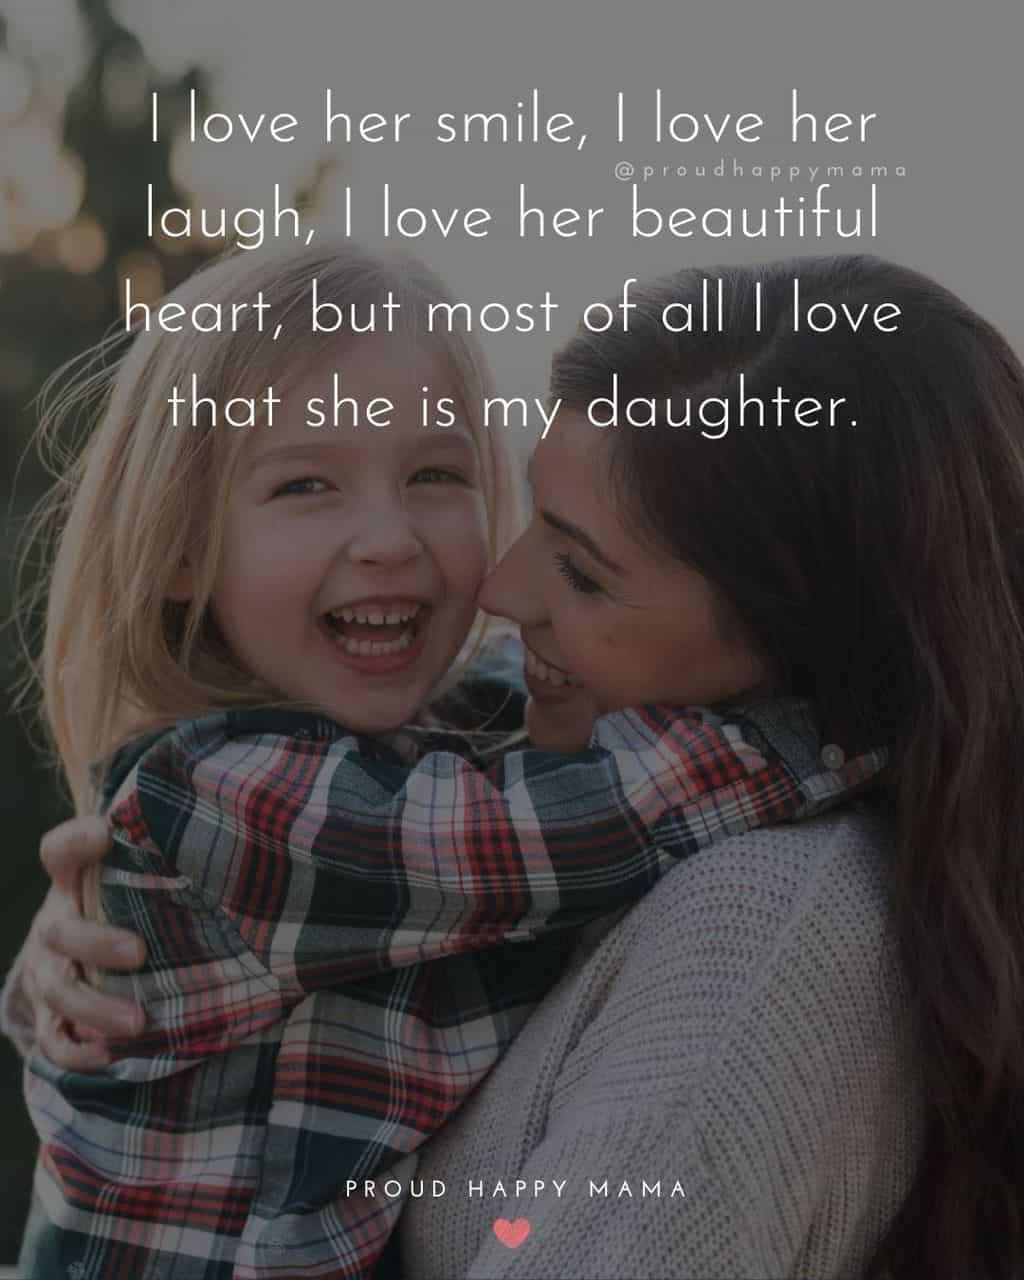 quotes for my daughter - ‘I love her smile, I love her laugh, I love her beautiful heart, but most of all I love that she is my daughter.’